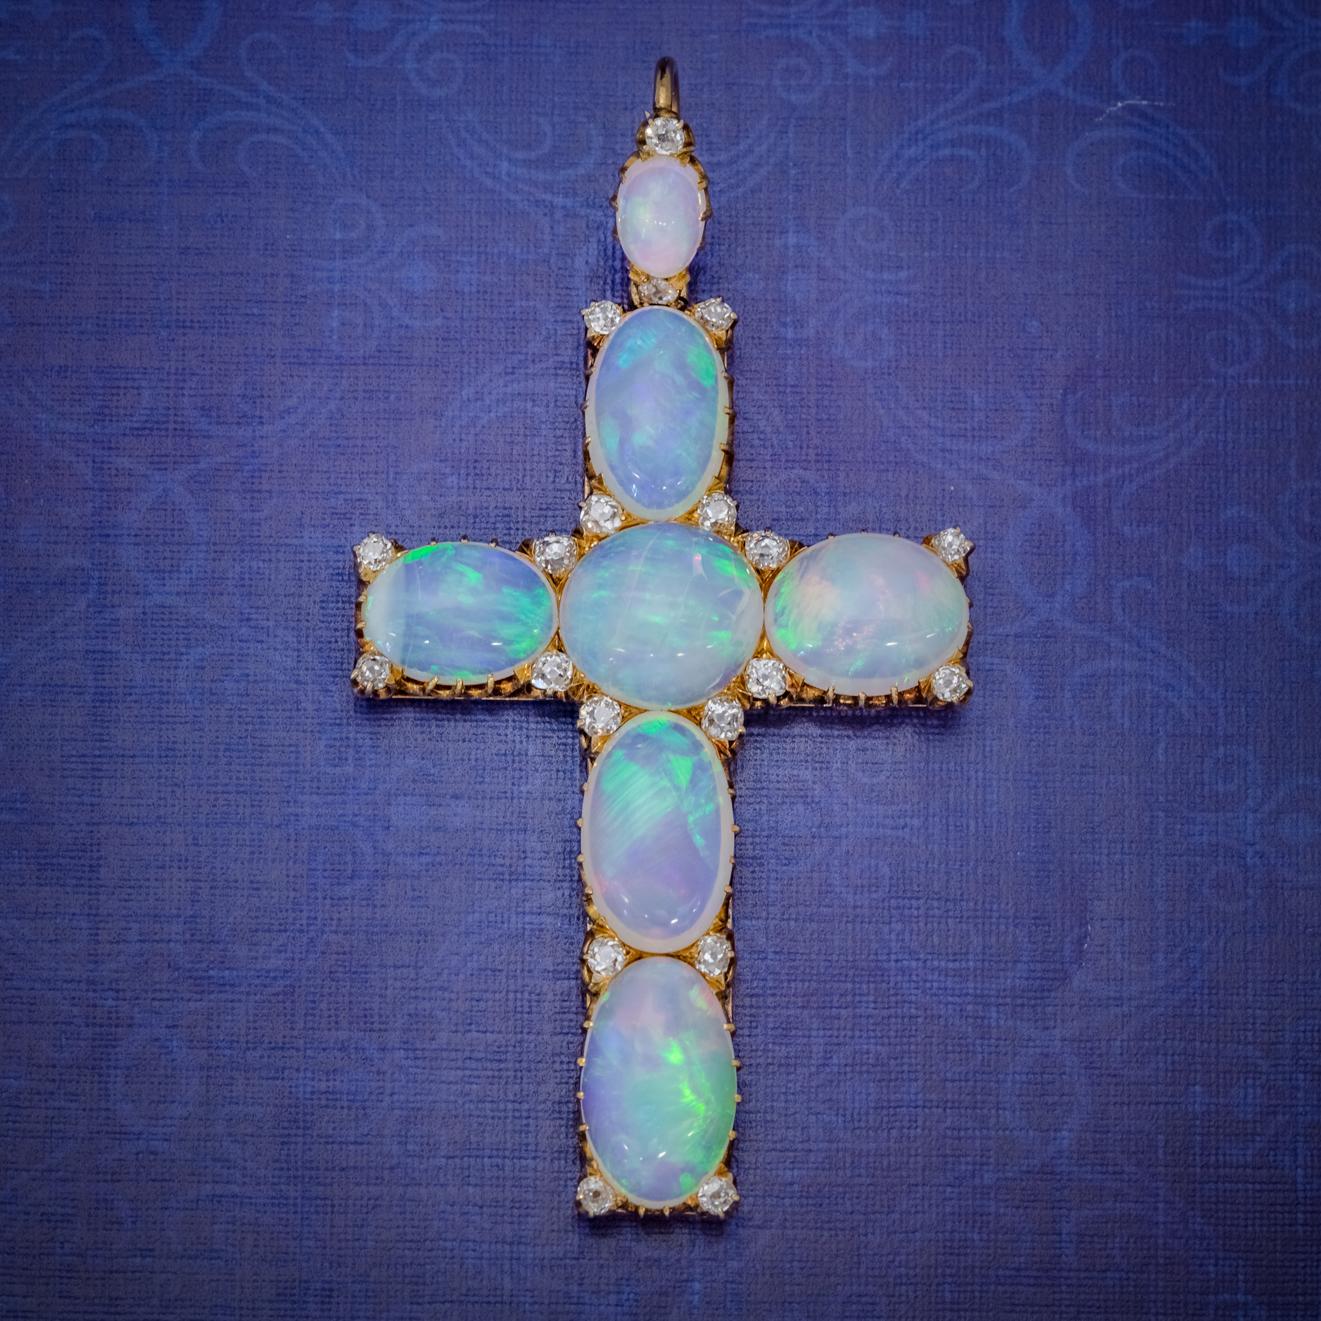 This spellbinding Antique Victorian cross pendant is set with seven stunning natural Opals which are a kaleidoscope of rainbow colours shimmering and changing colours with the light. Each stone radiates blues, pinks, greens and an inner orange and